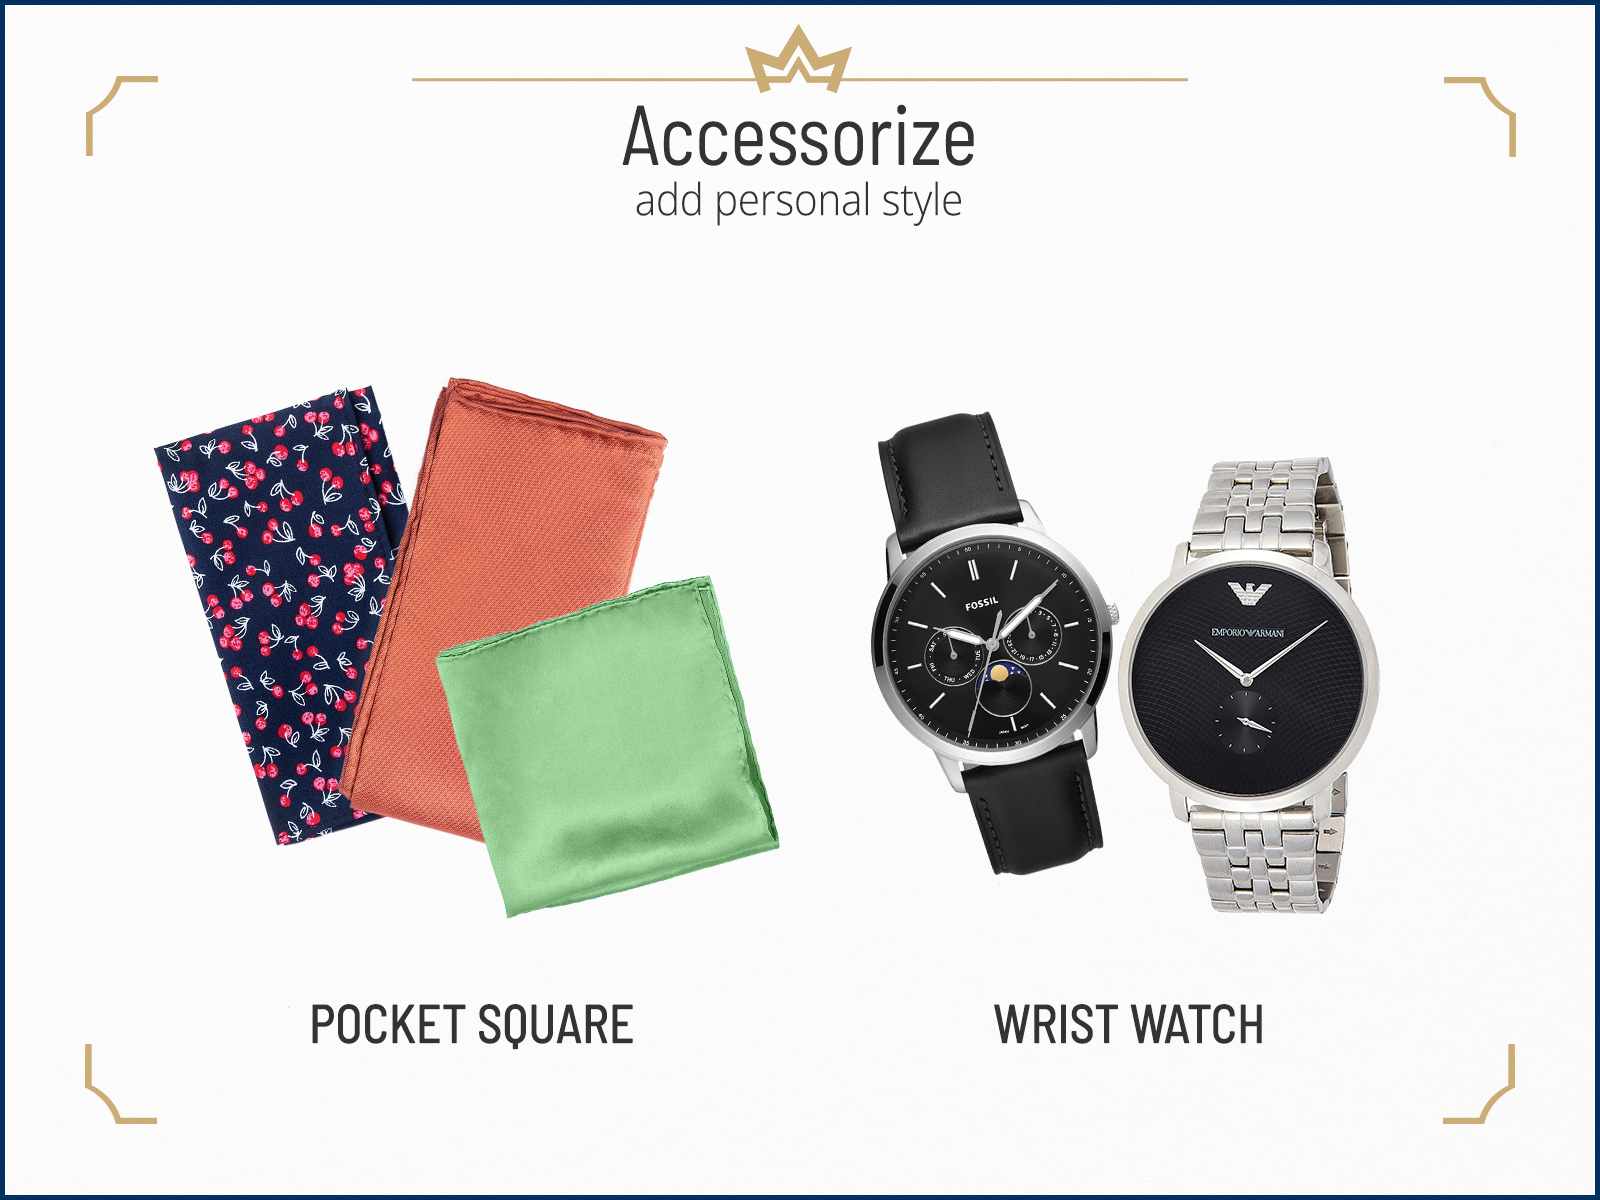 Other recommended accessories for semi-formal events